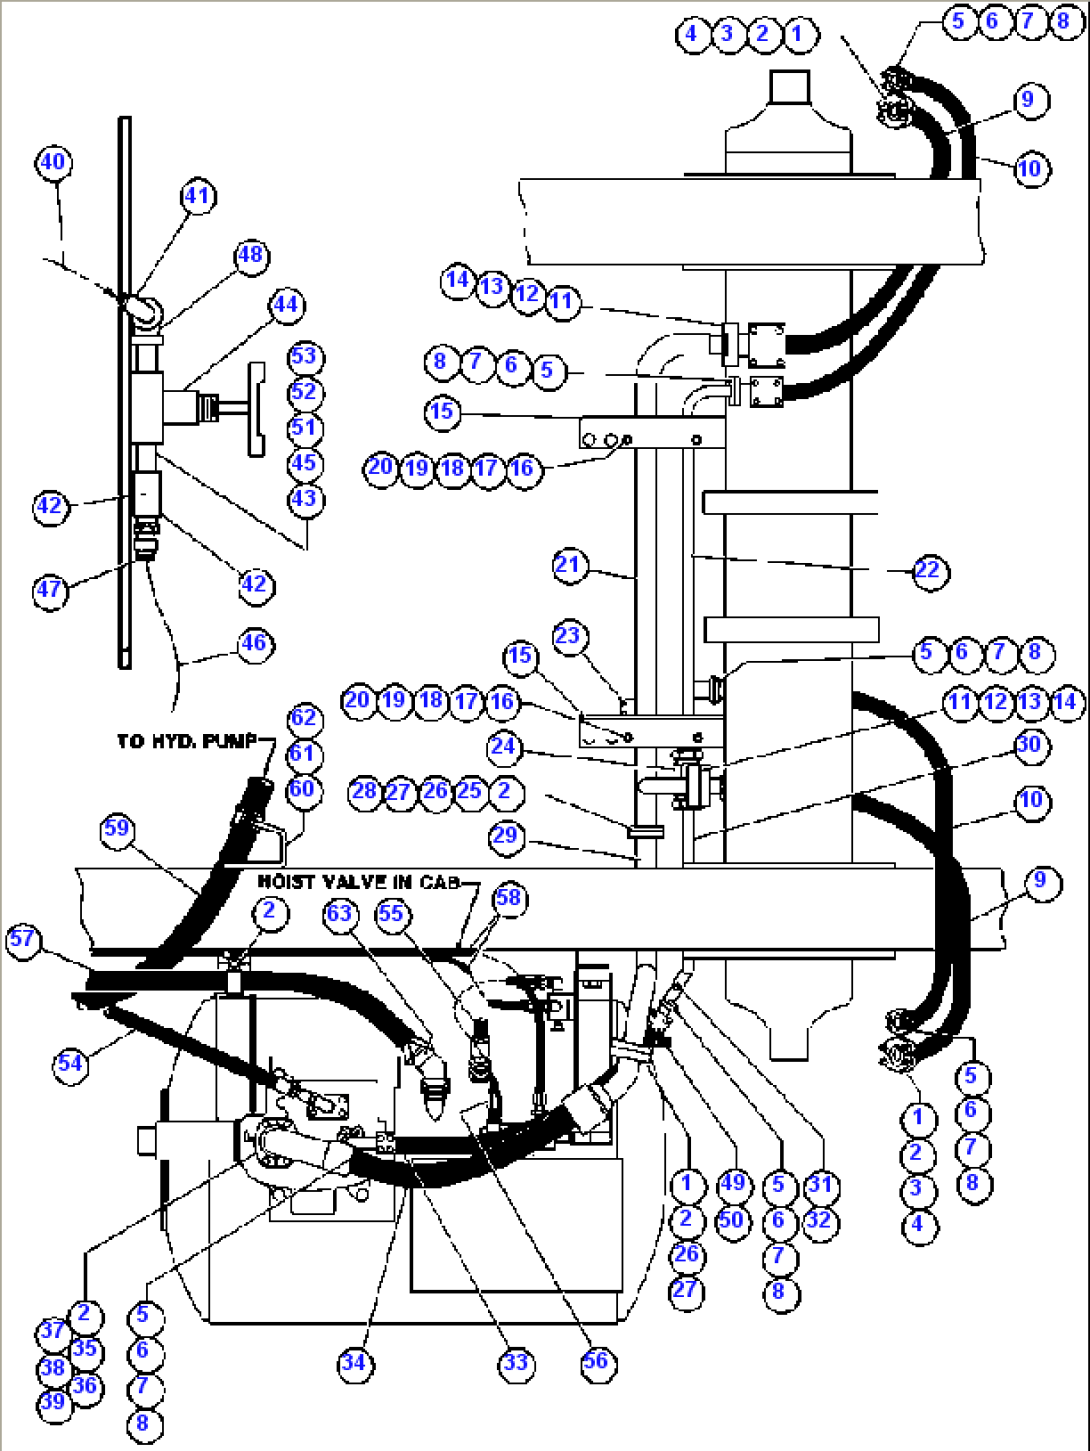 HOIST CYLINDER PIPING